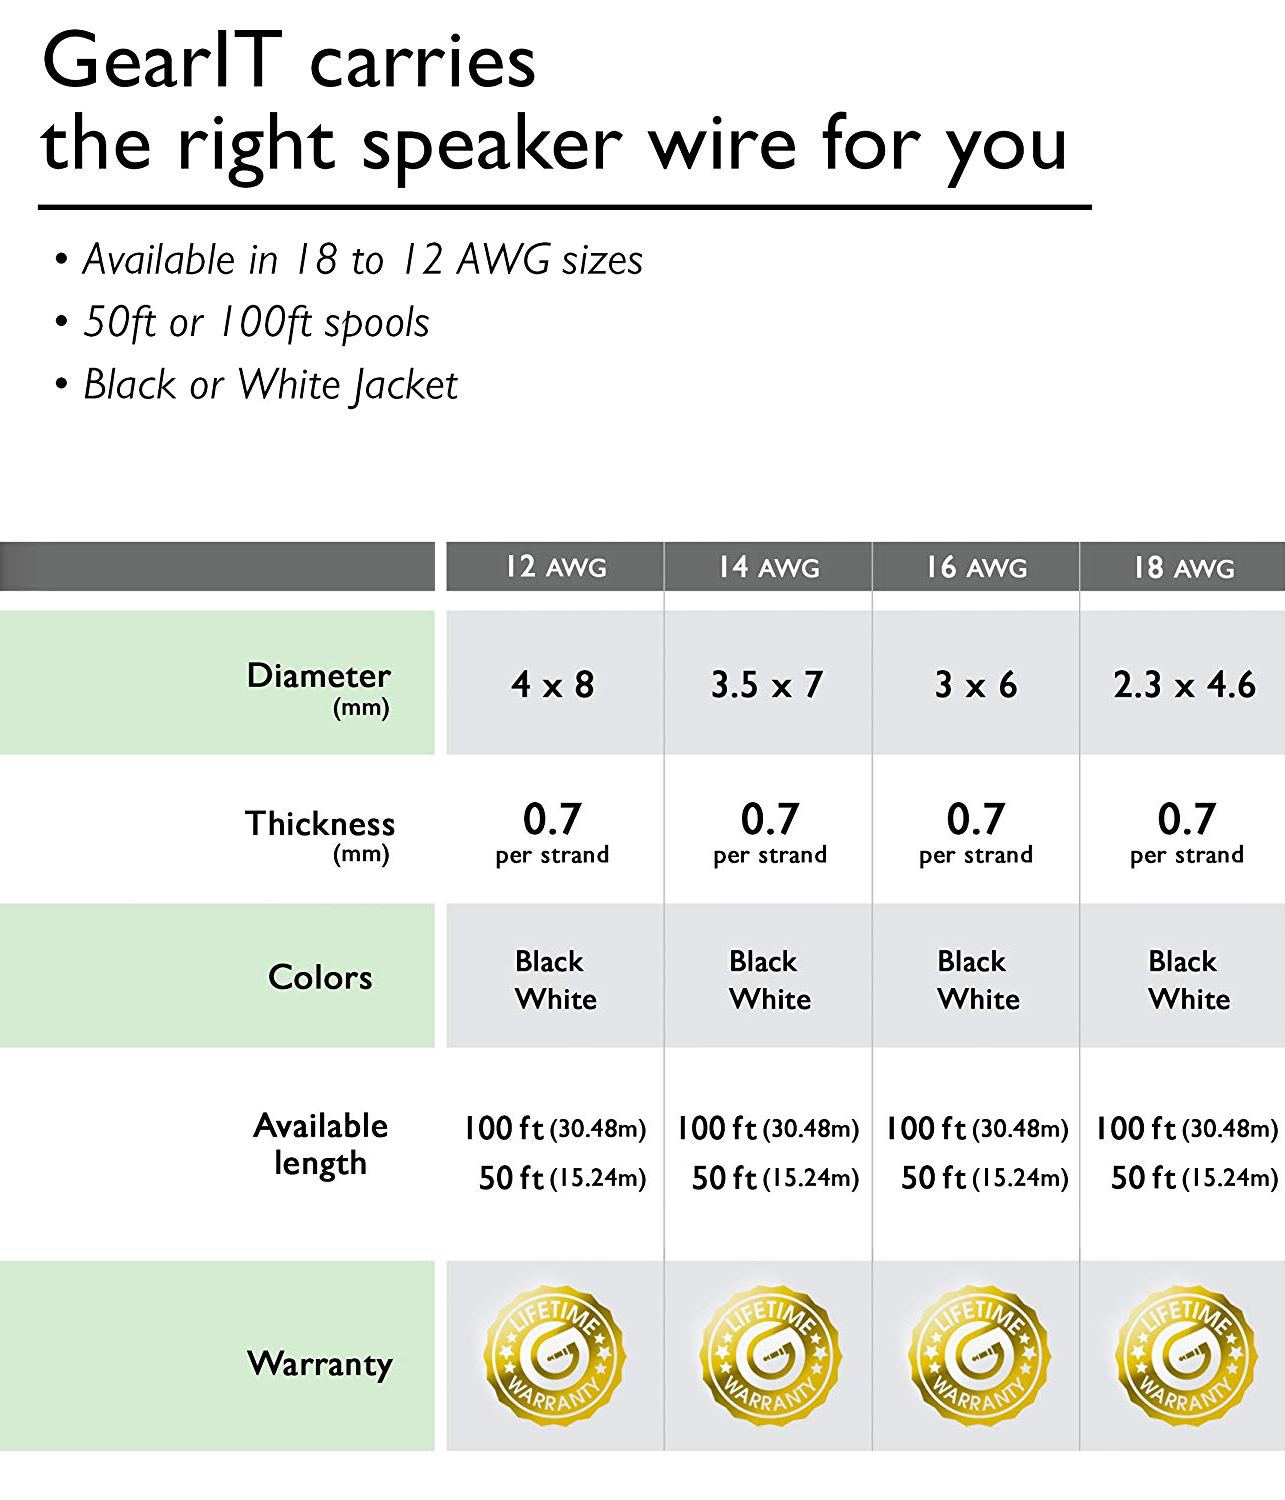 16AWG Speaker Wire, GearIT Pro Series 16 Gauge Speaker Wire Cable (50 Feet / 15 Meters) Great Use for Home Theater Speakers and Car Speakers, Black - image 5 of 7